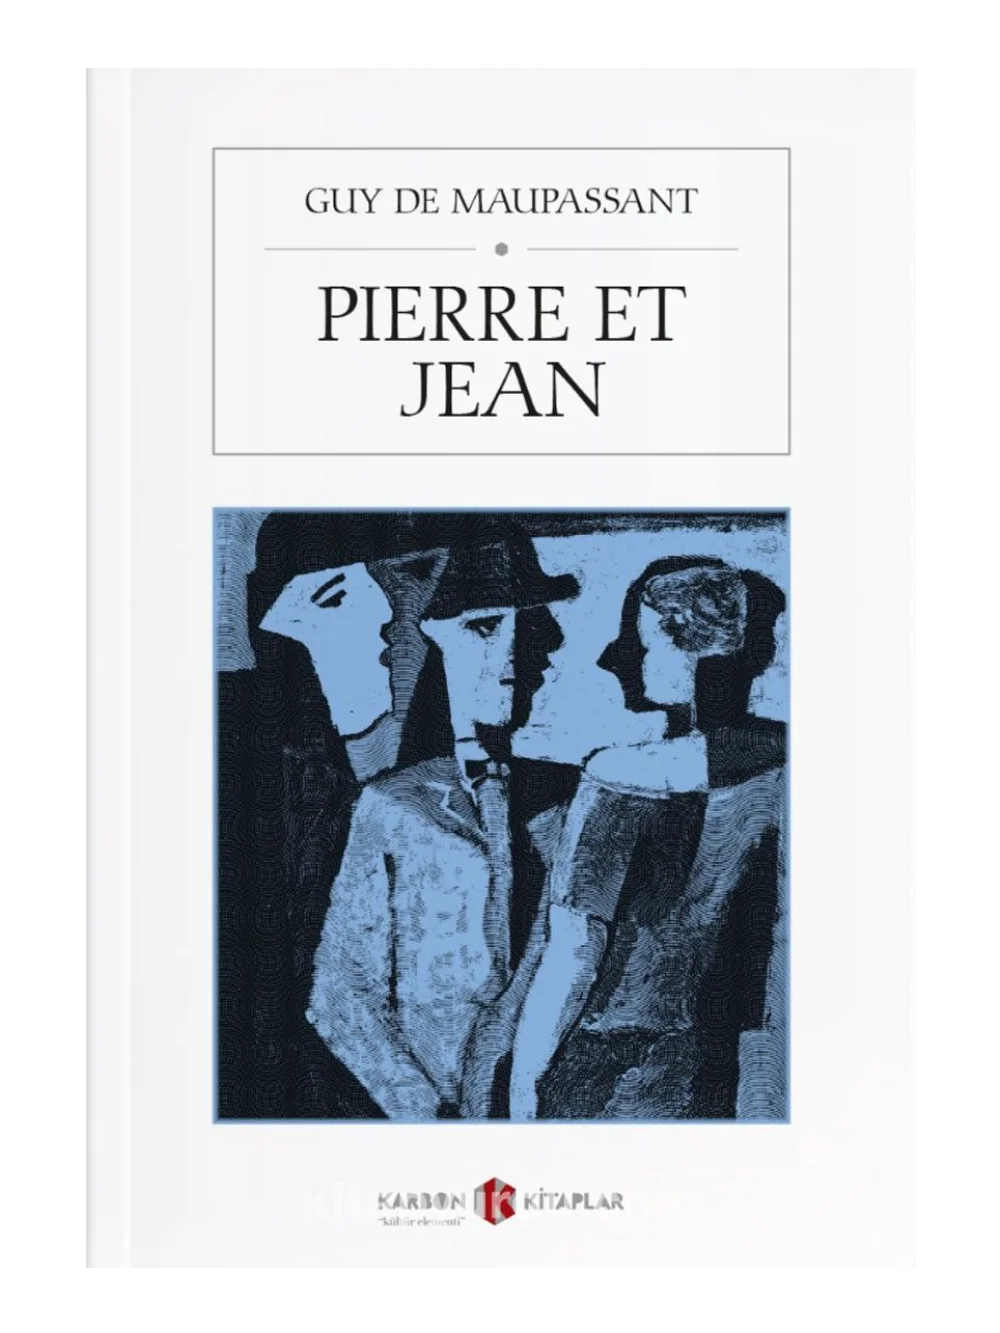 

Peter and John - Guy de Maupassant - French book - The best classics of world literature - Nice gift for friends and French learners